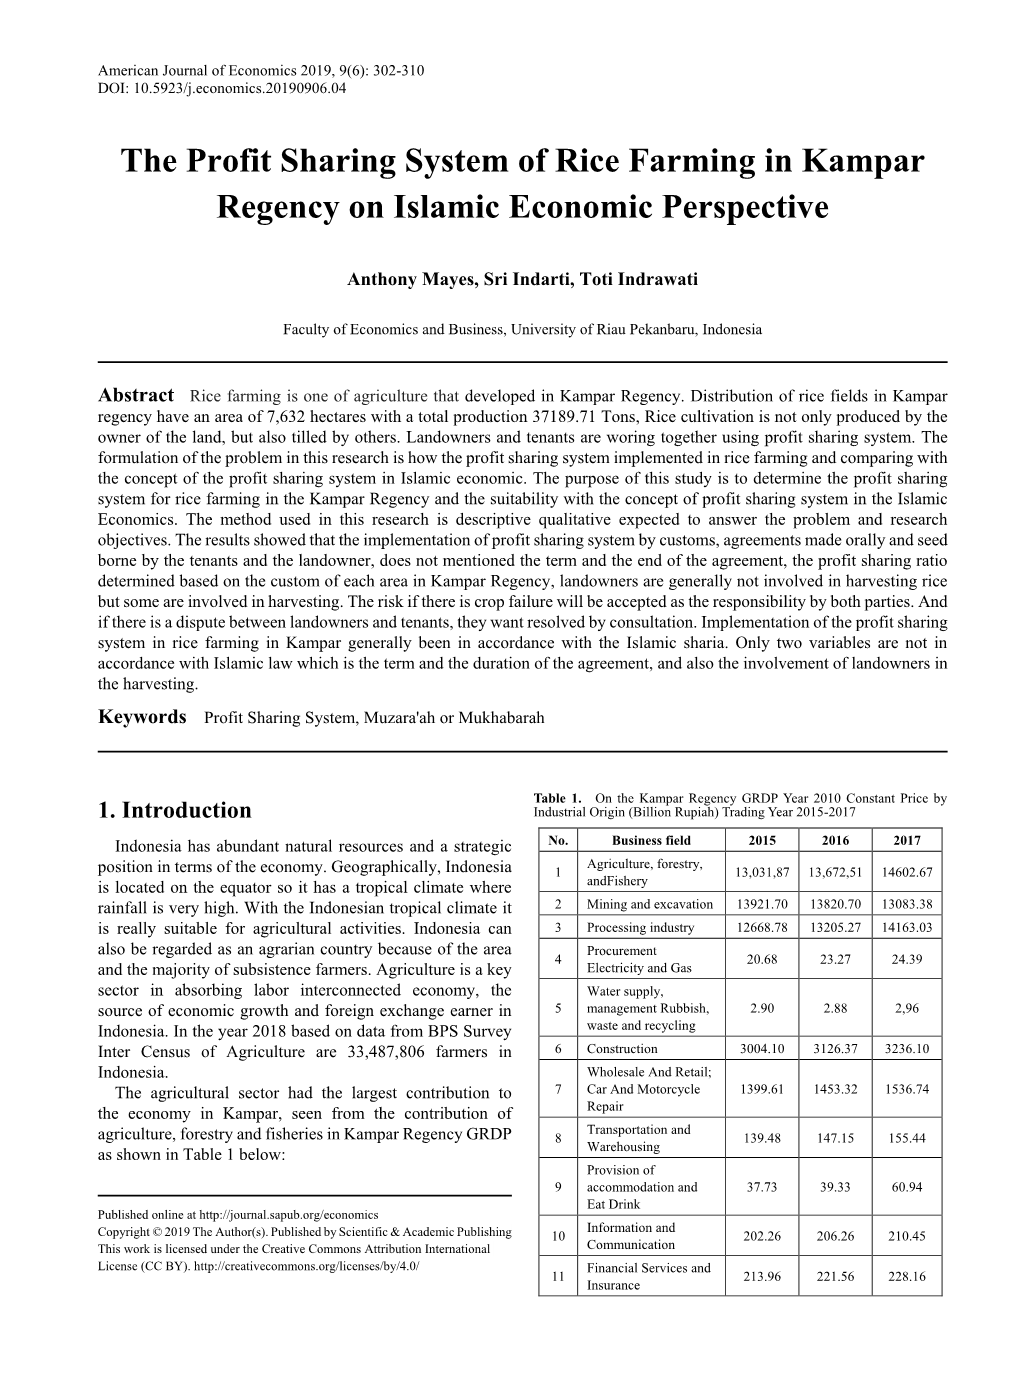 The Profit Sharing System of Rice Farming in Kampar Regency on Islamic Economic Perspective